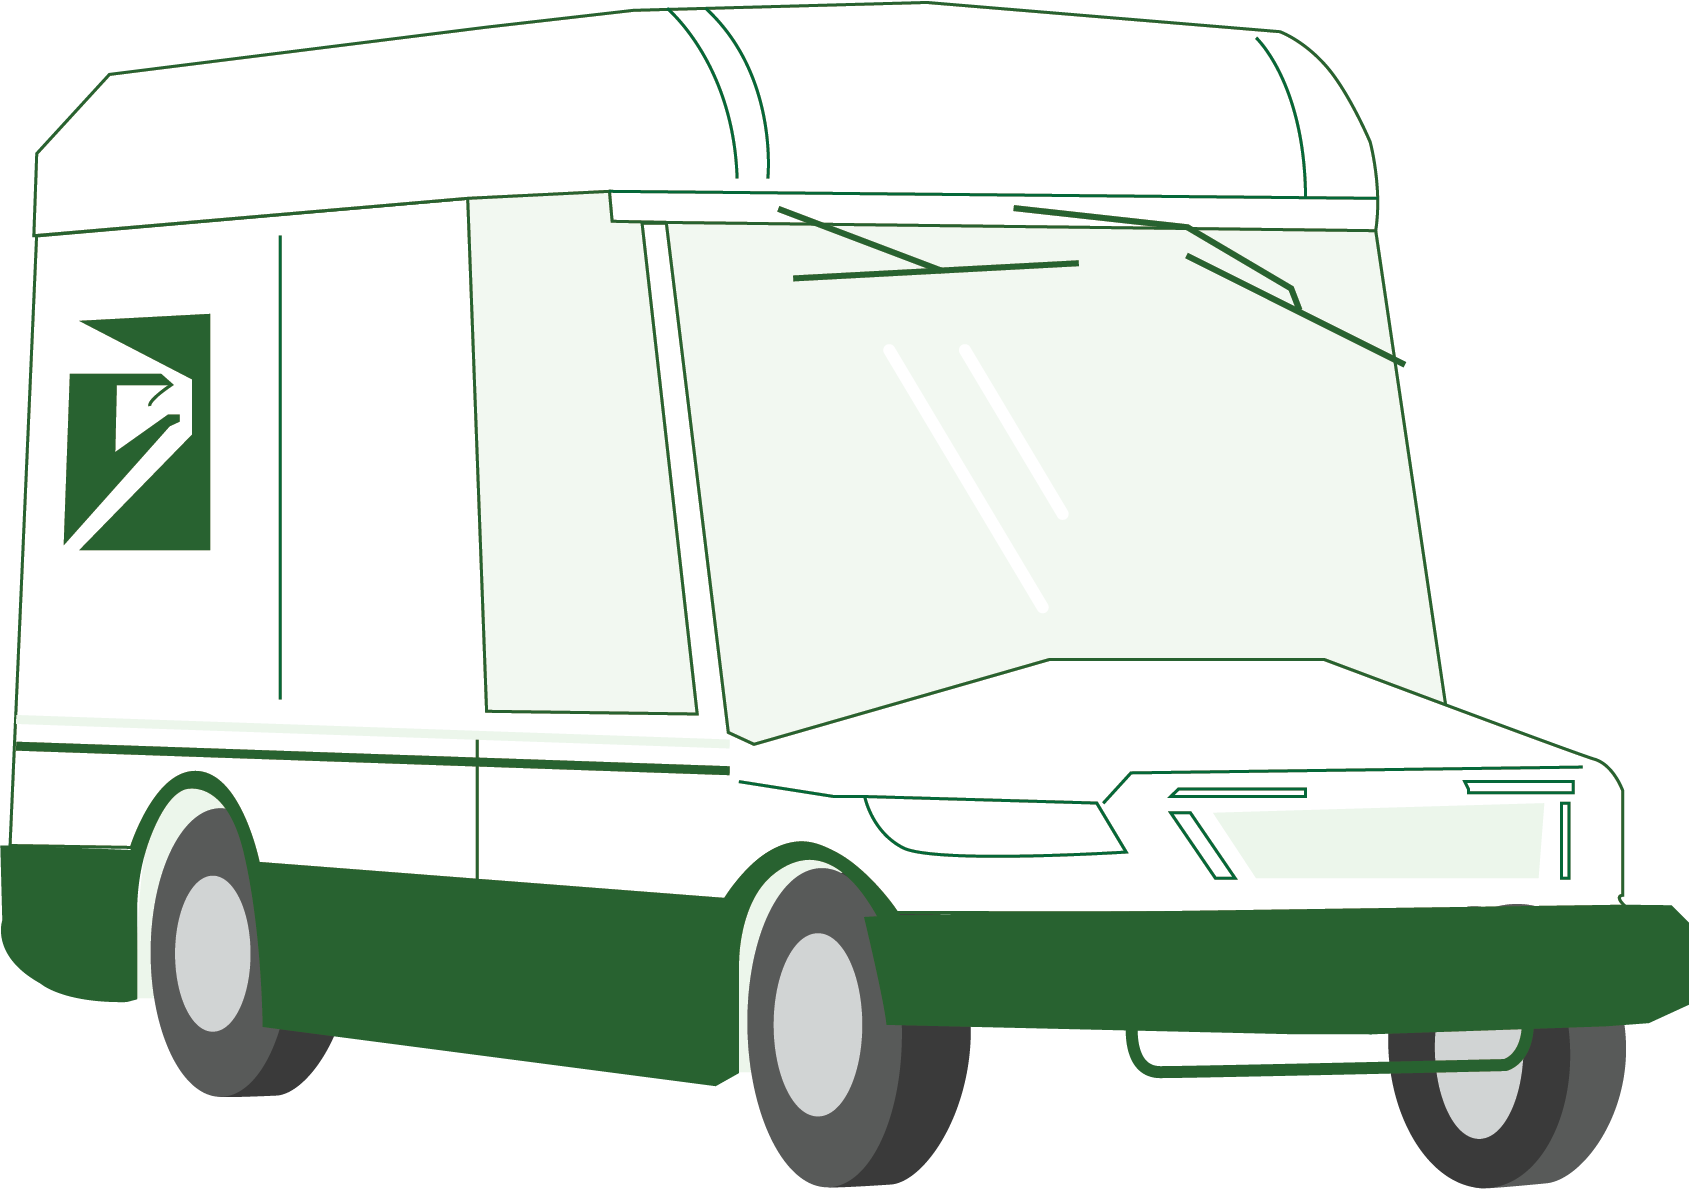 An illustration of one of the Postal Service's new EVs.